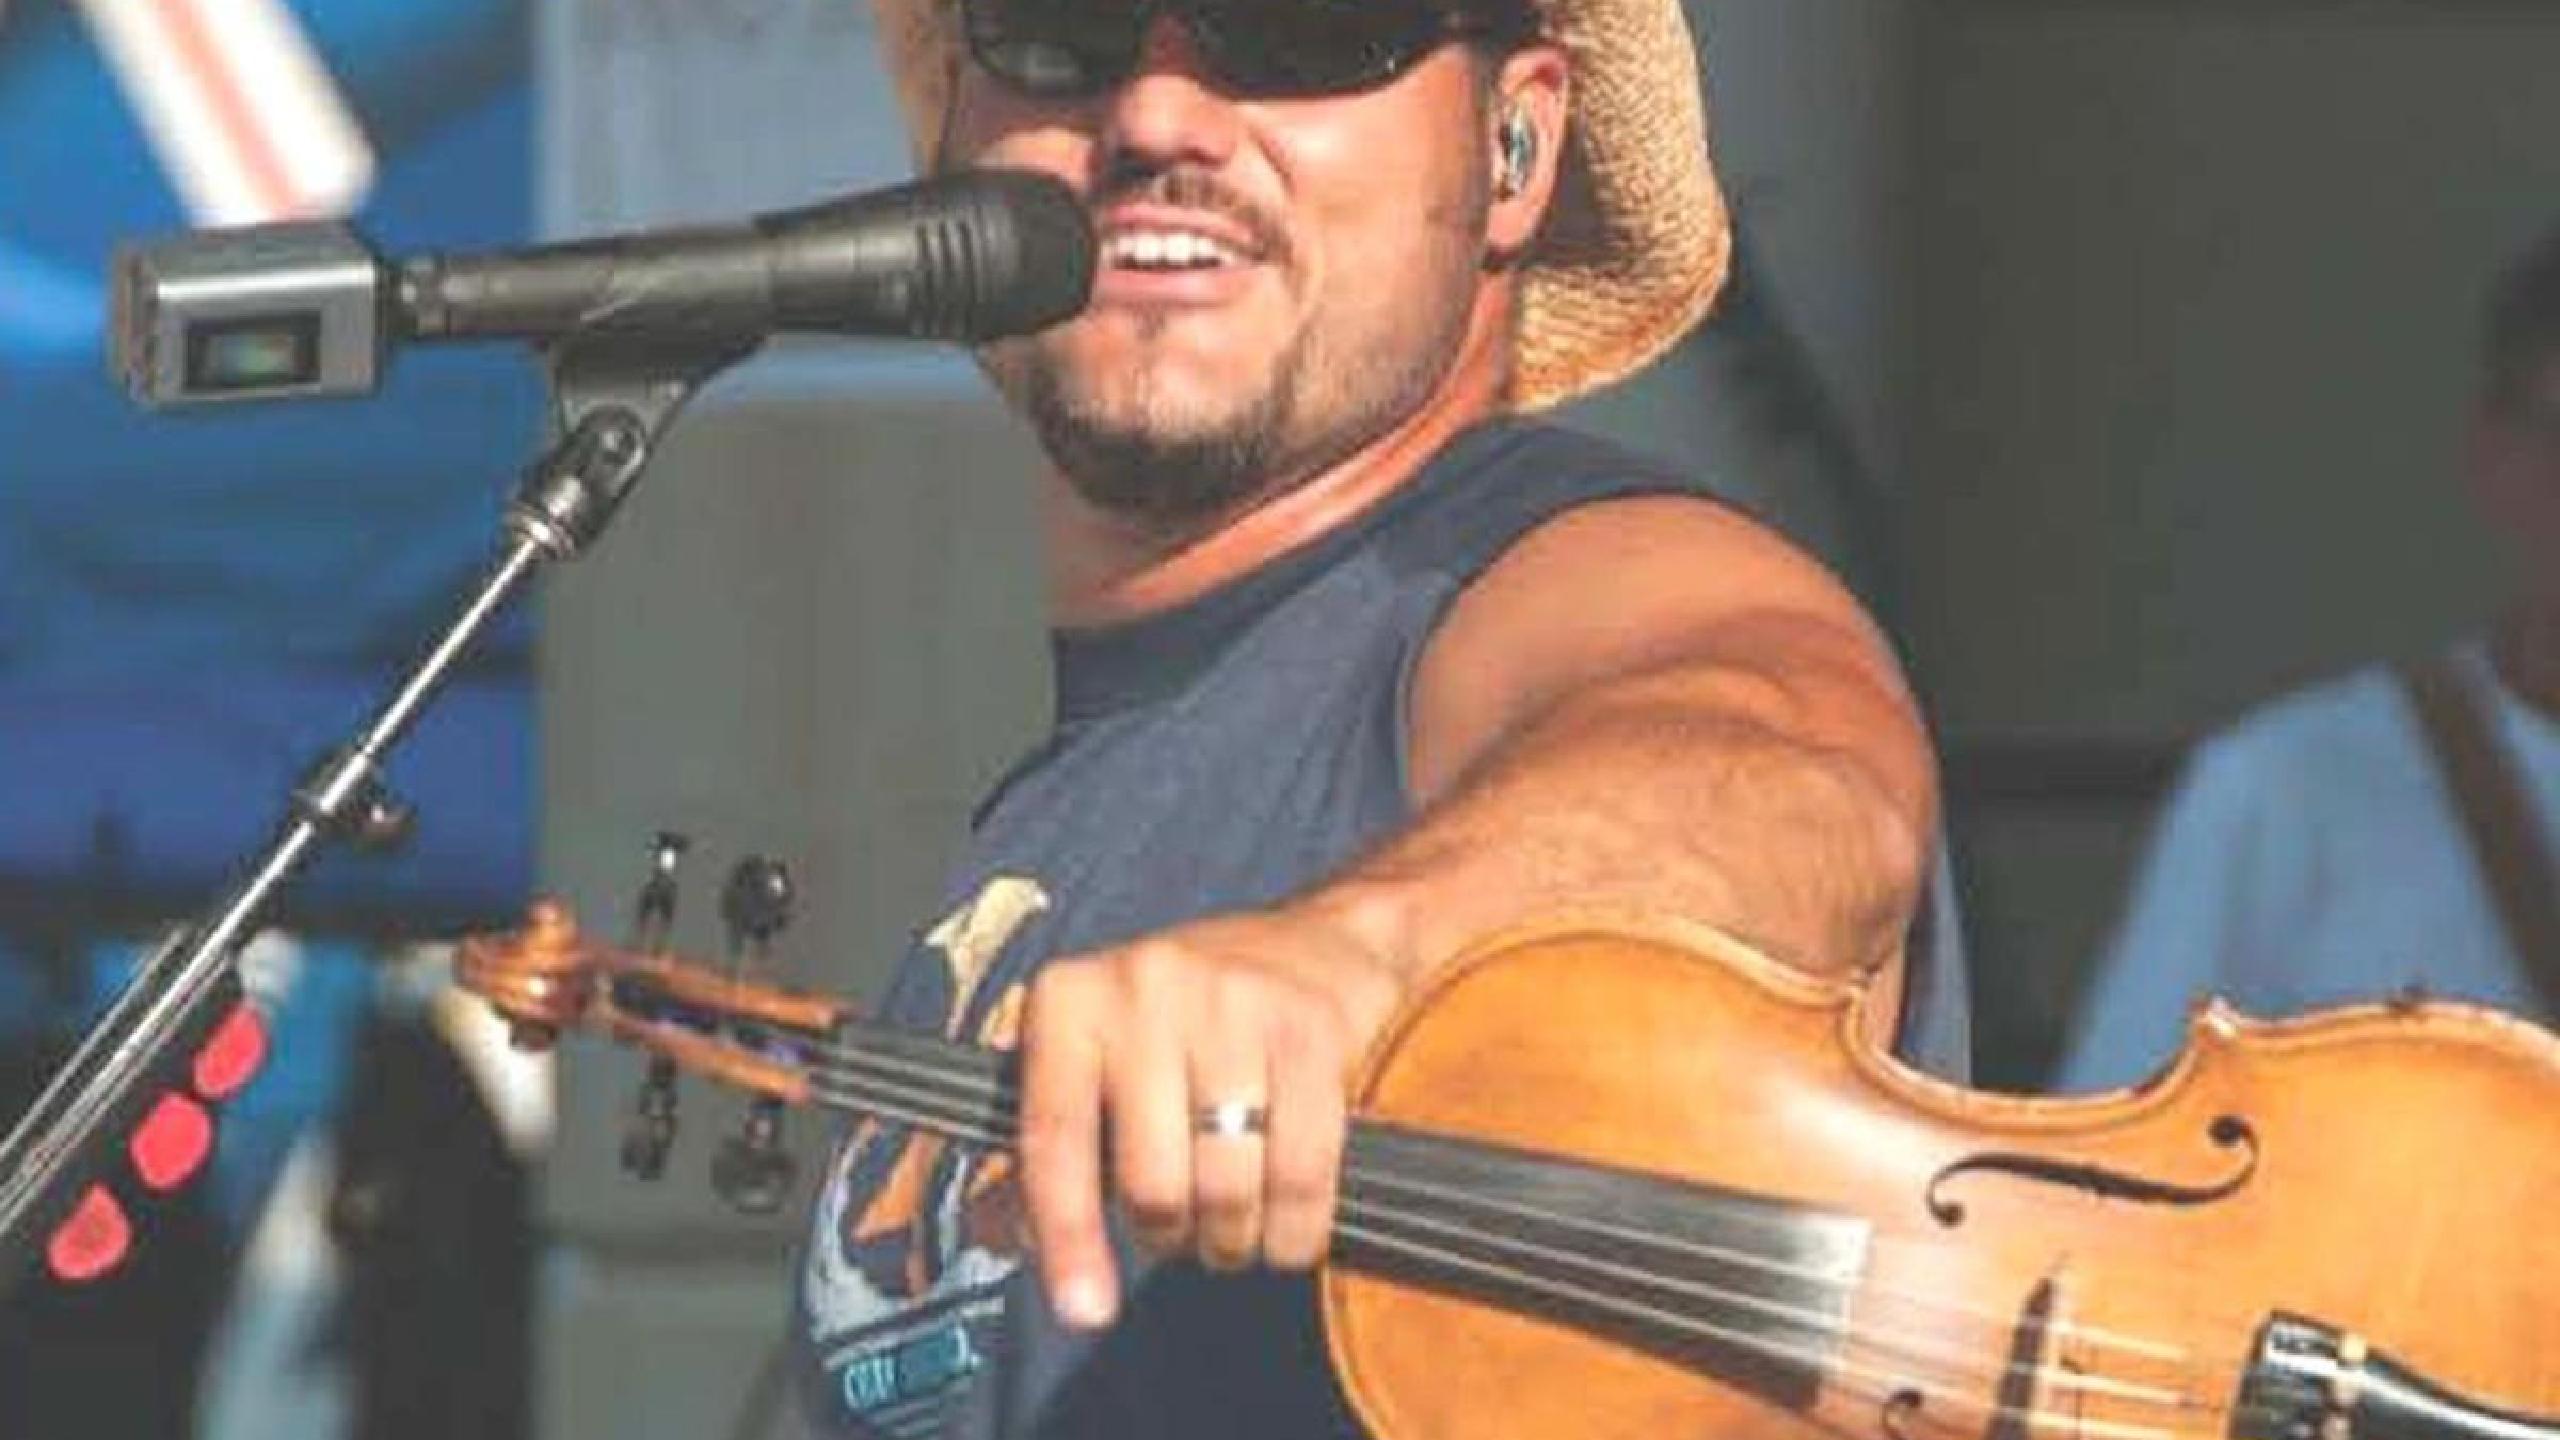 Chris Higbee tour dates 2022 2023. Chris Higbee tickets and concerts